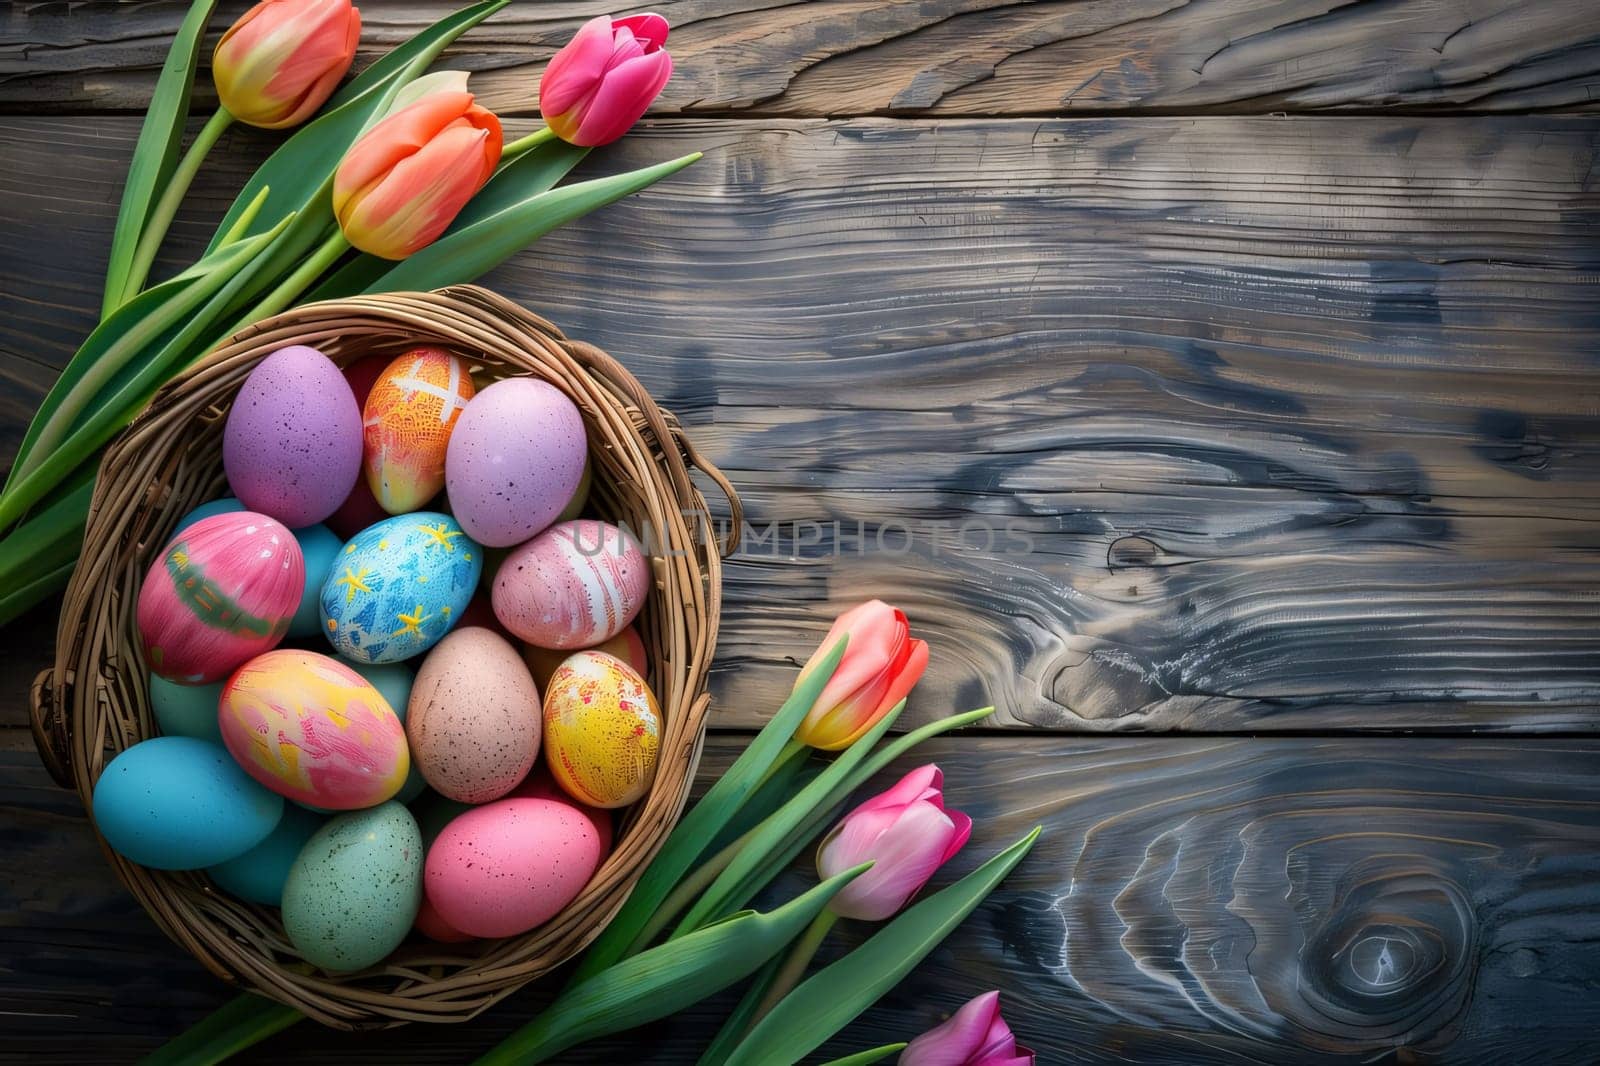 Colorful Easter Eggs and Fresh Tulips on Wooden Background by ThemesS